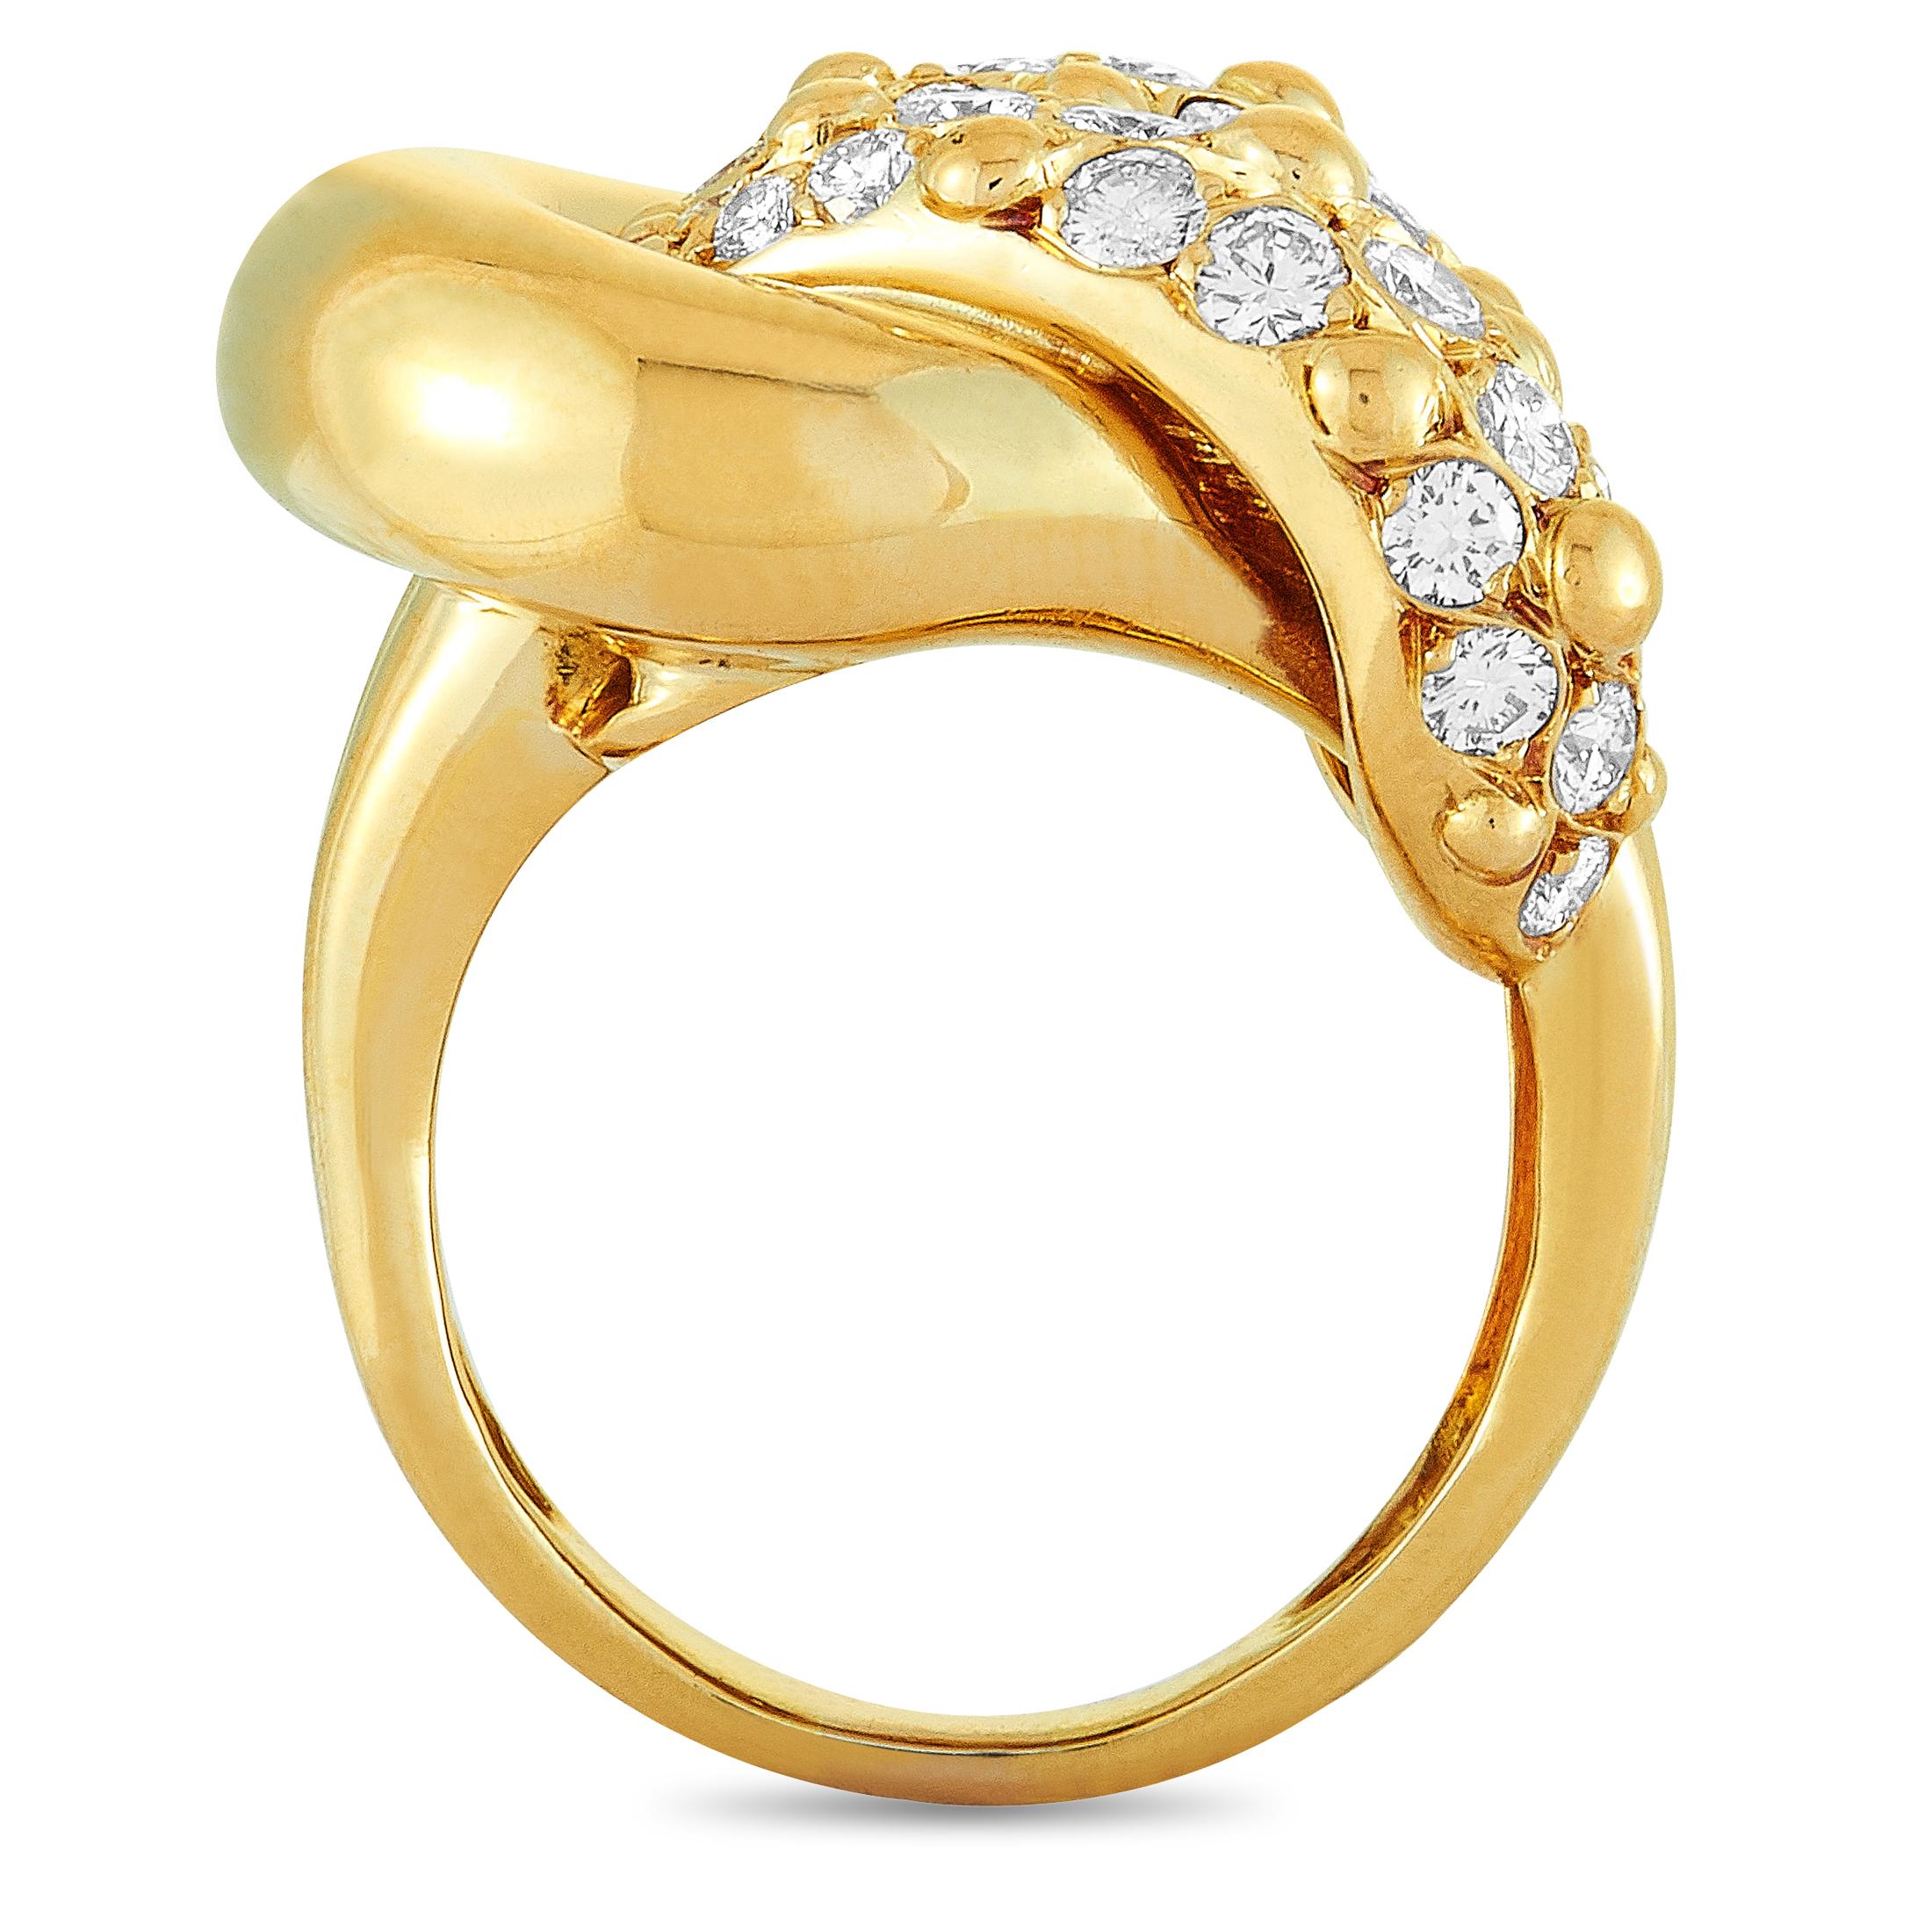 This Van Cleef & Arpels ring is made out of 18K yellow gold and diamonds that total 1.70 carats and feature grade F color and VVS clarity. The ring weighs 14.4 grams, boasting band thickness of 3 mm and top height of 8 mm, while top dimensions